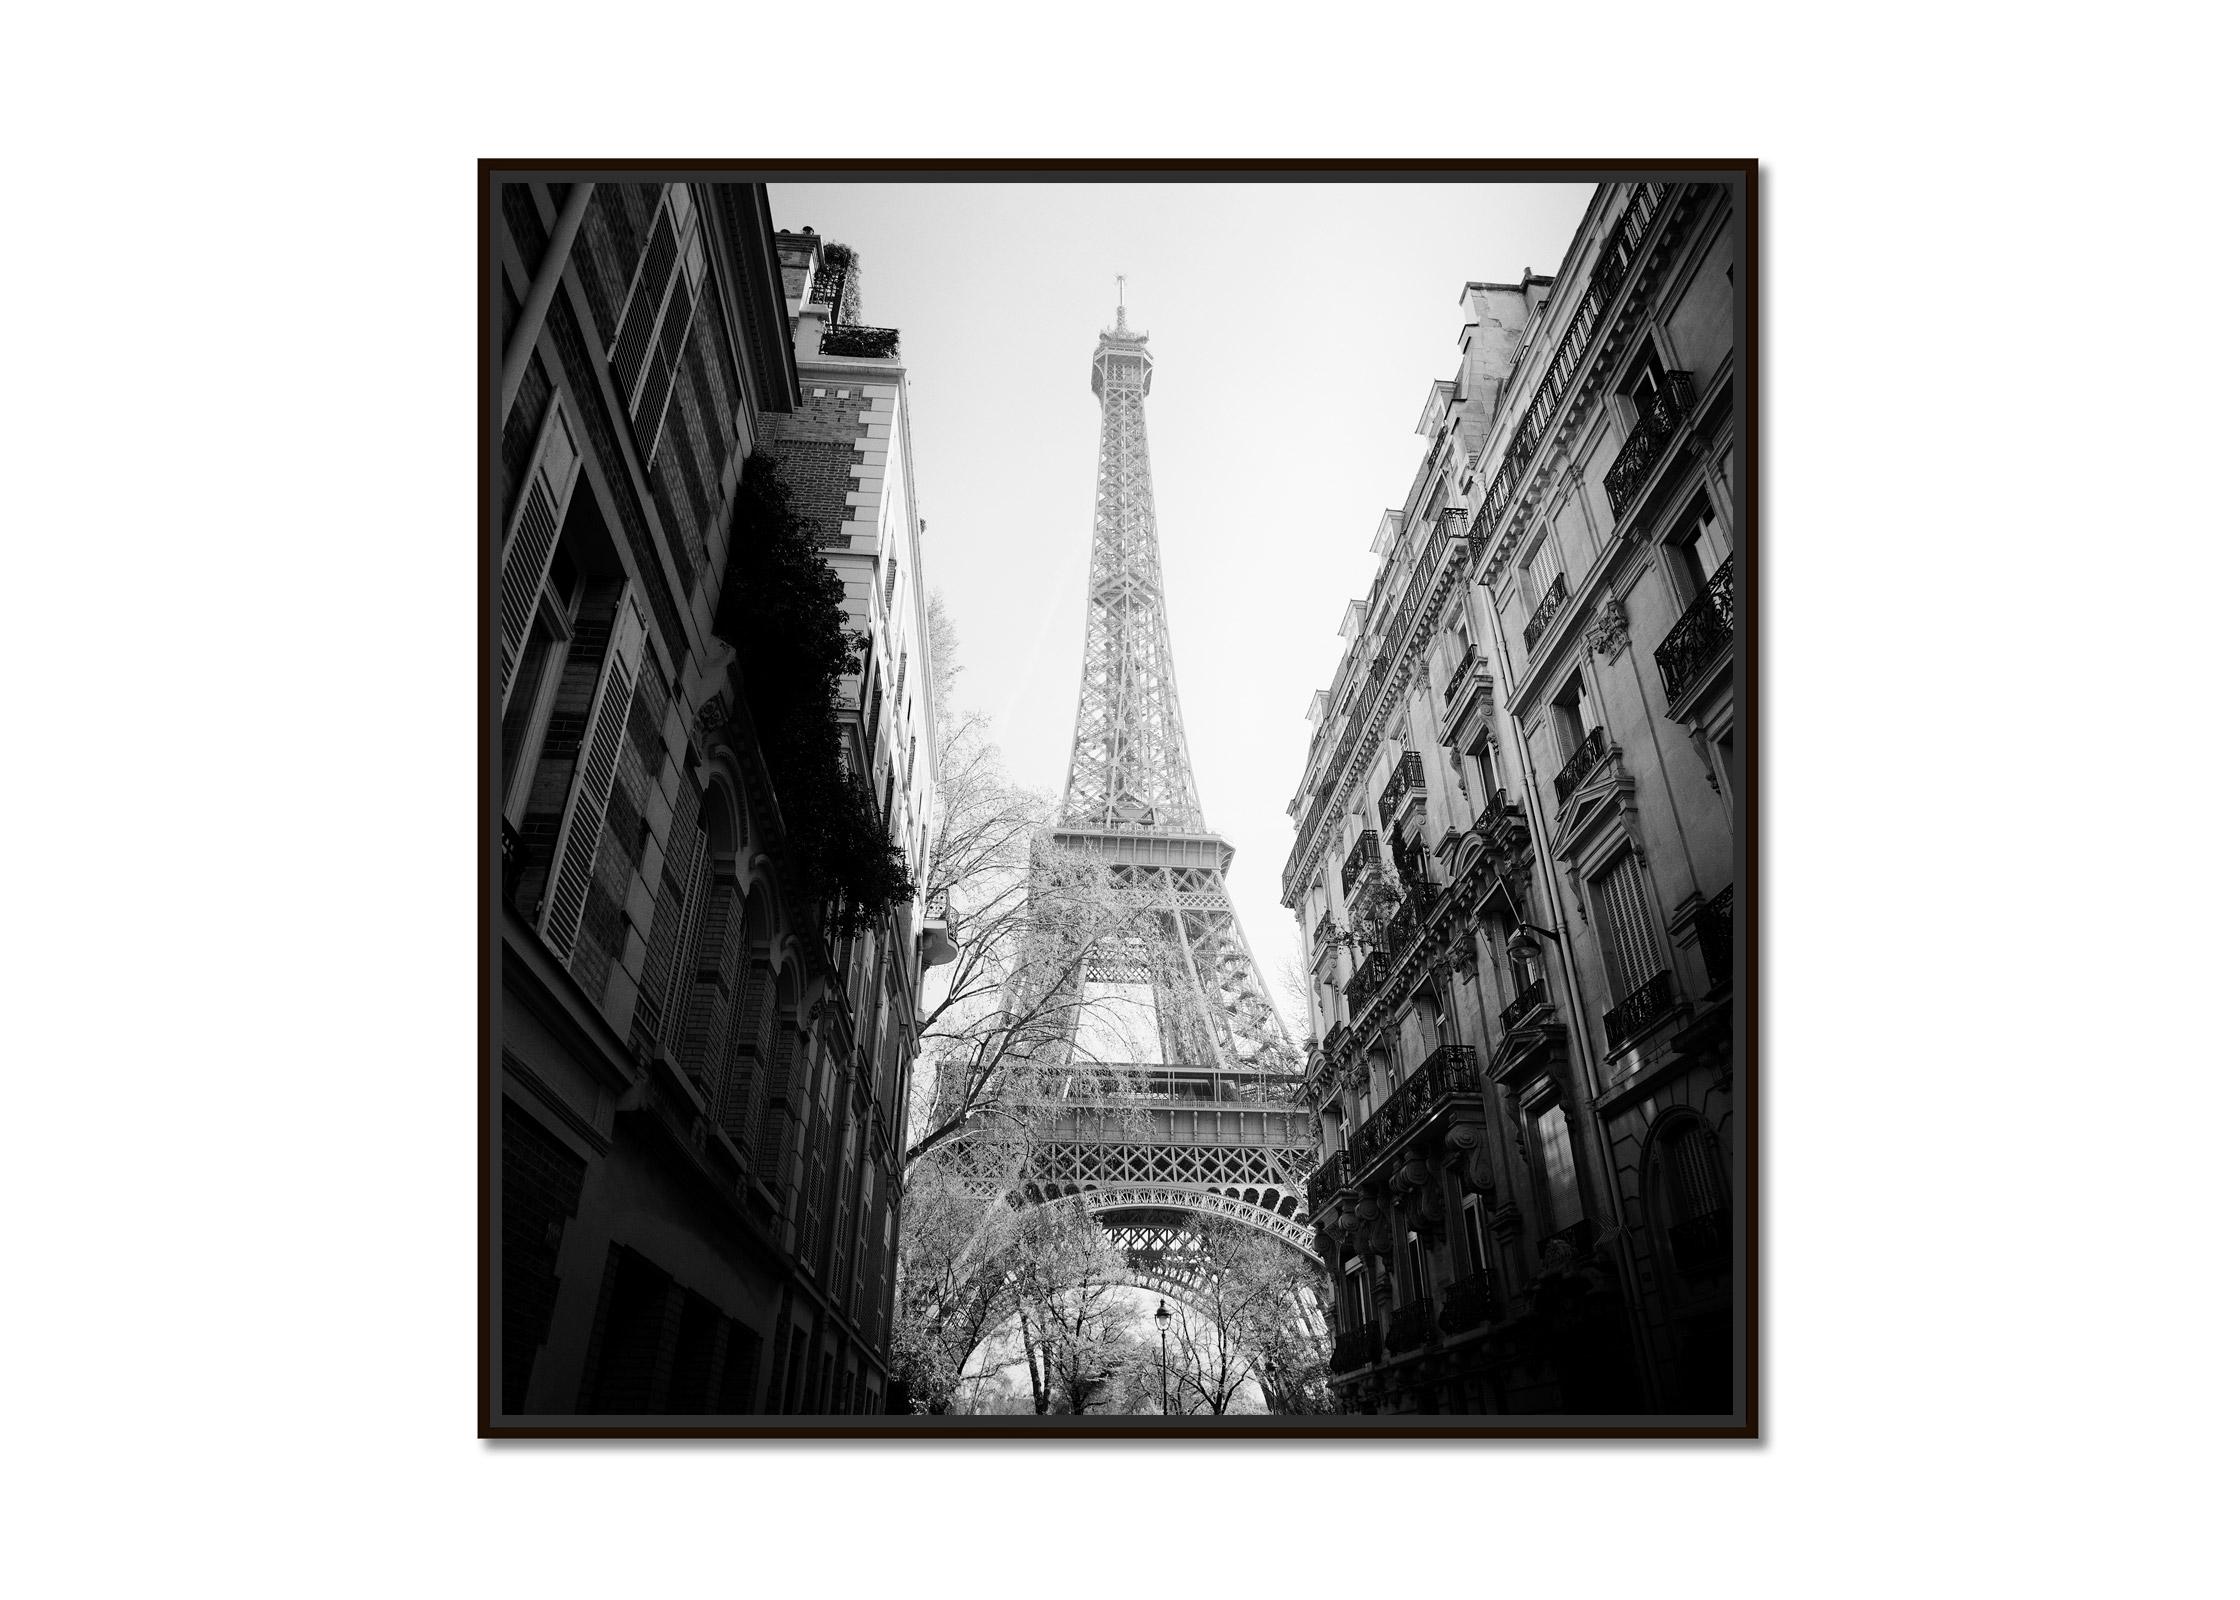 Eiffel Tower architecture detail Paris black and white fine art city photography - Photograph by Gerald Berghammer